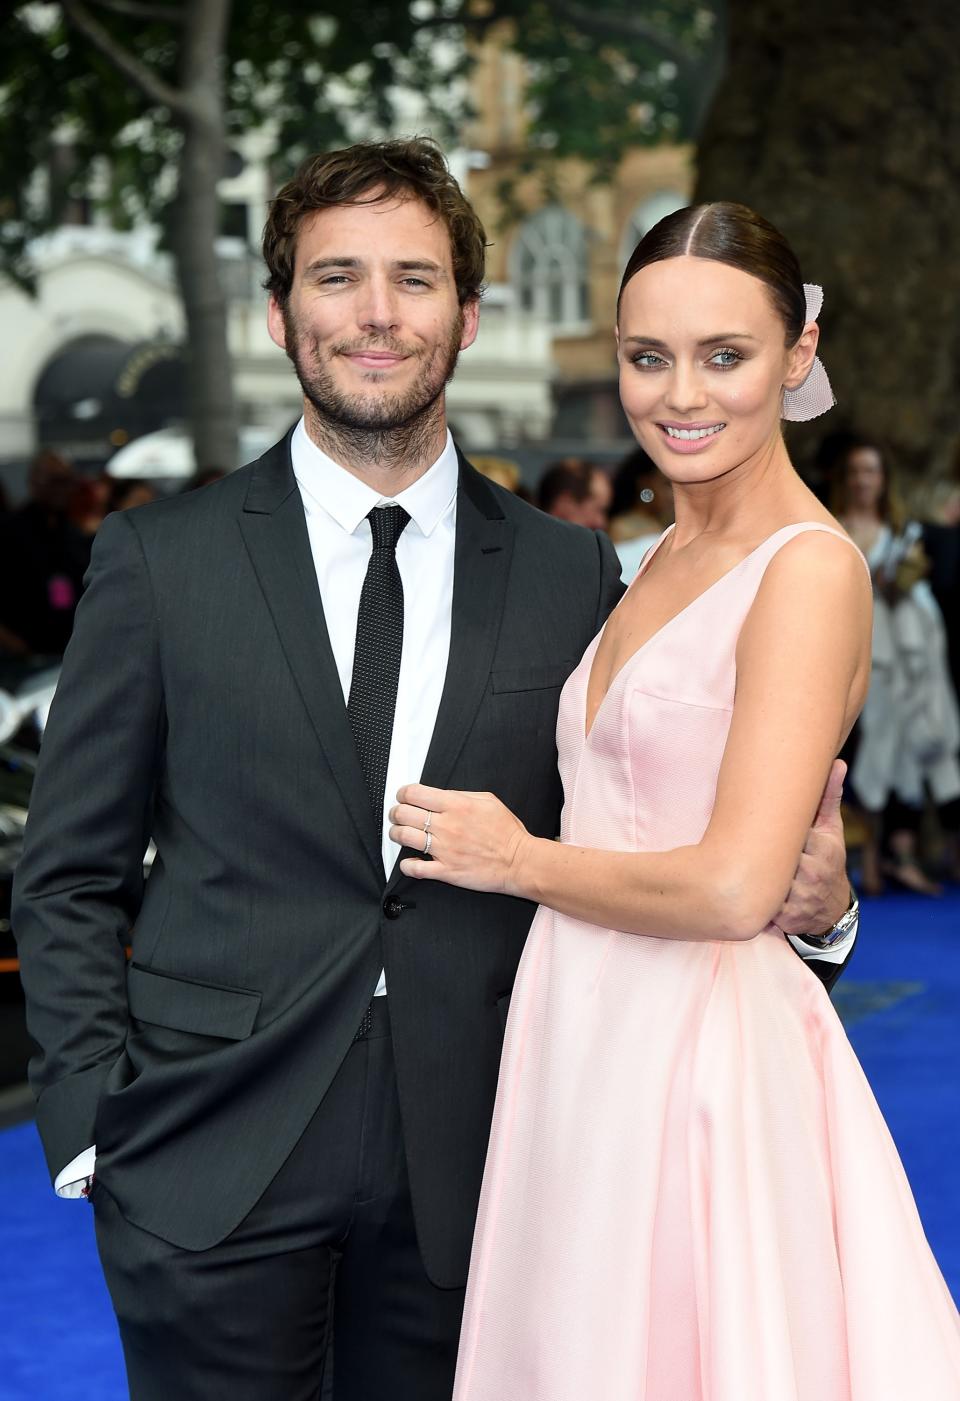 Sam Claflin says he’d rather spend time with his wife, Laura Haddock, and their two children than be an activist (Getty)